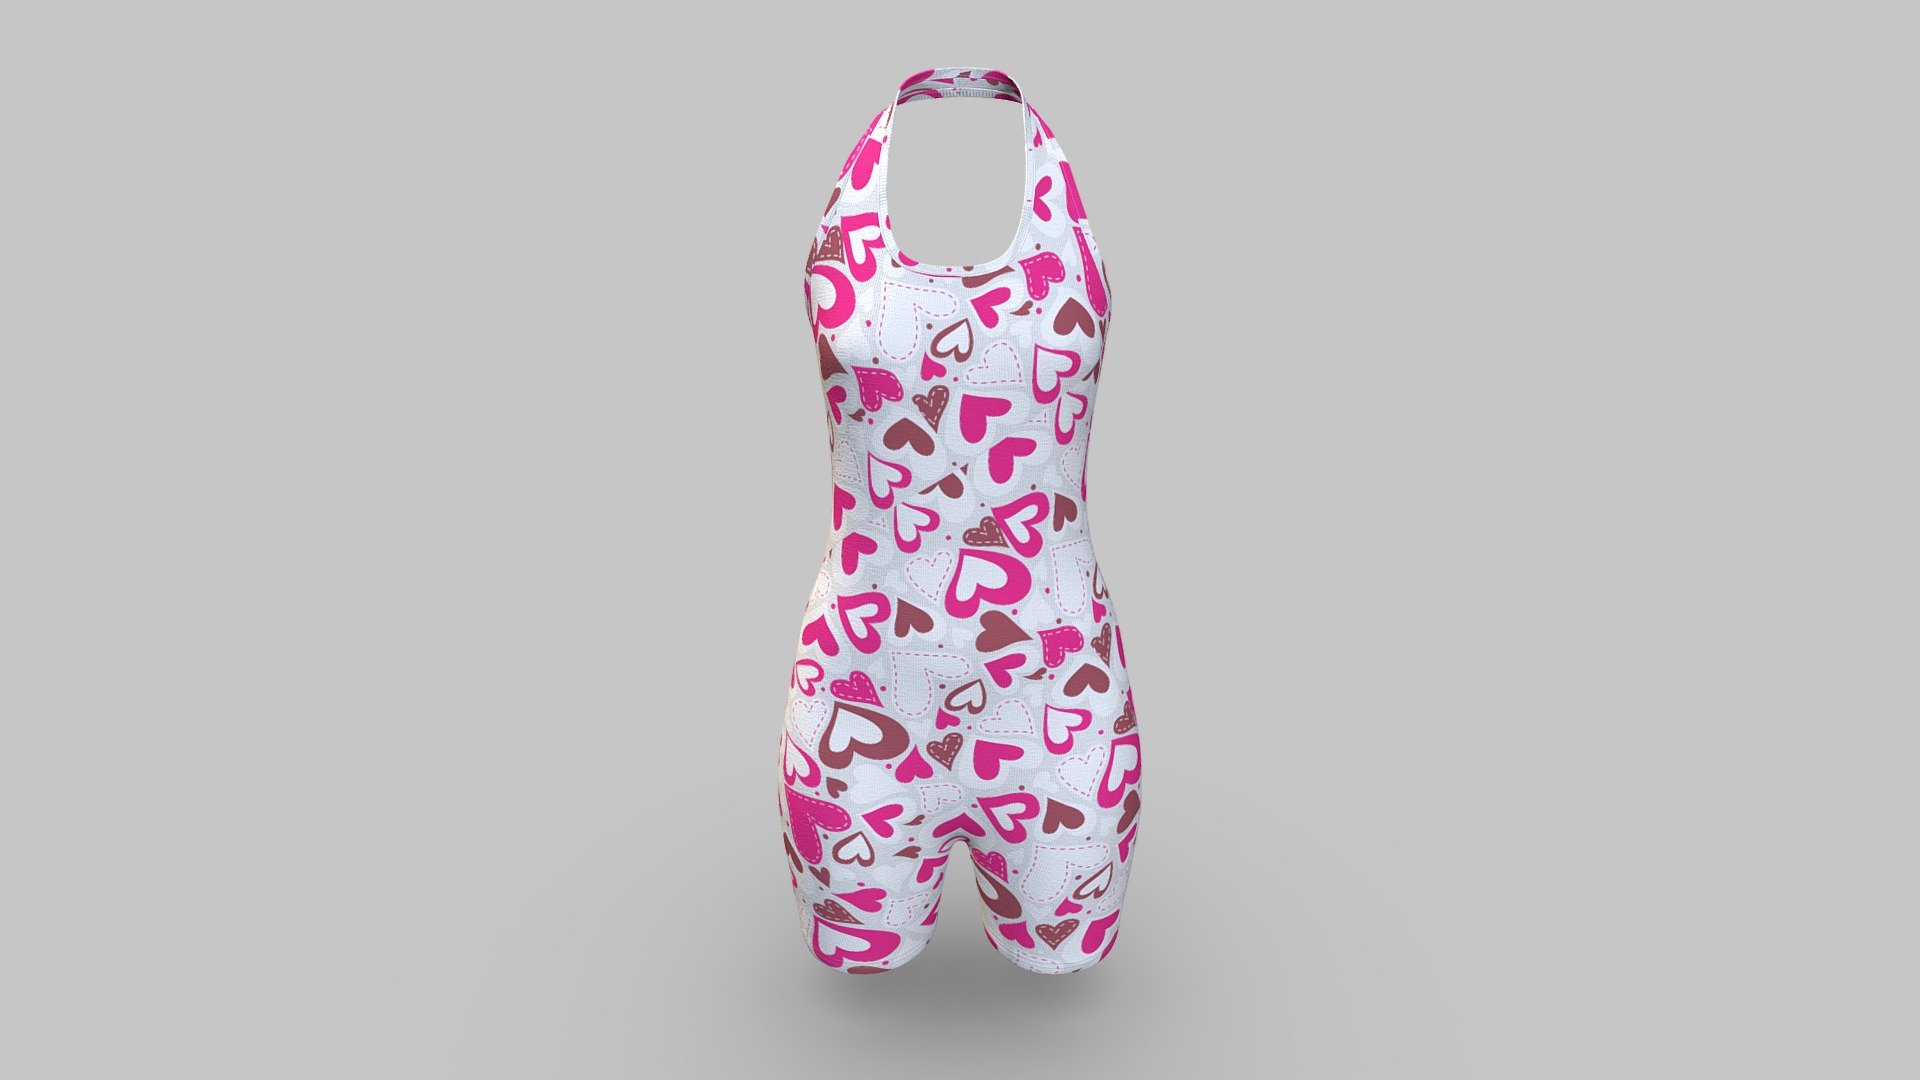 Cloth Title = Women Swimsuit Dress 

SKU = DG100150 

Category = Women 

Product Type = Swimsuit 

Cloth Length = Regular 

Body Fit = Skinny Fit 
 
Occasion = Beach 


Our Services:

3D Apparel Design.

OBJ,FBX,GLTF Making with High/Low Poly.

Fabric Digitalization.

Mockup making.

3D Teck Pack.

Pattern Making.

2D Illustration.

Cloth Animation and 360 Spin Video.


Contact us:- 

Email: info@digitalfashionwear.com 

Website: https://digitalfashionwear.com 


We designed all the types of cloth specially focused on product visualization, e-commerce, fitting, and production. 

We will design: 

T-shirts 

Polo shirts 

Hoodies 

Sweatshirt 

Jackets 

Shirts 

TankTops 

Trousers 

Bras 

Underwear 

Blazer 

Aprons 

Leggings 

and All Fashion items. 





Our goal is to make sure what we provide you, meets your demand 3d model